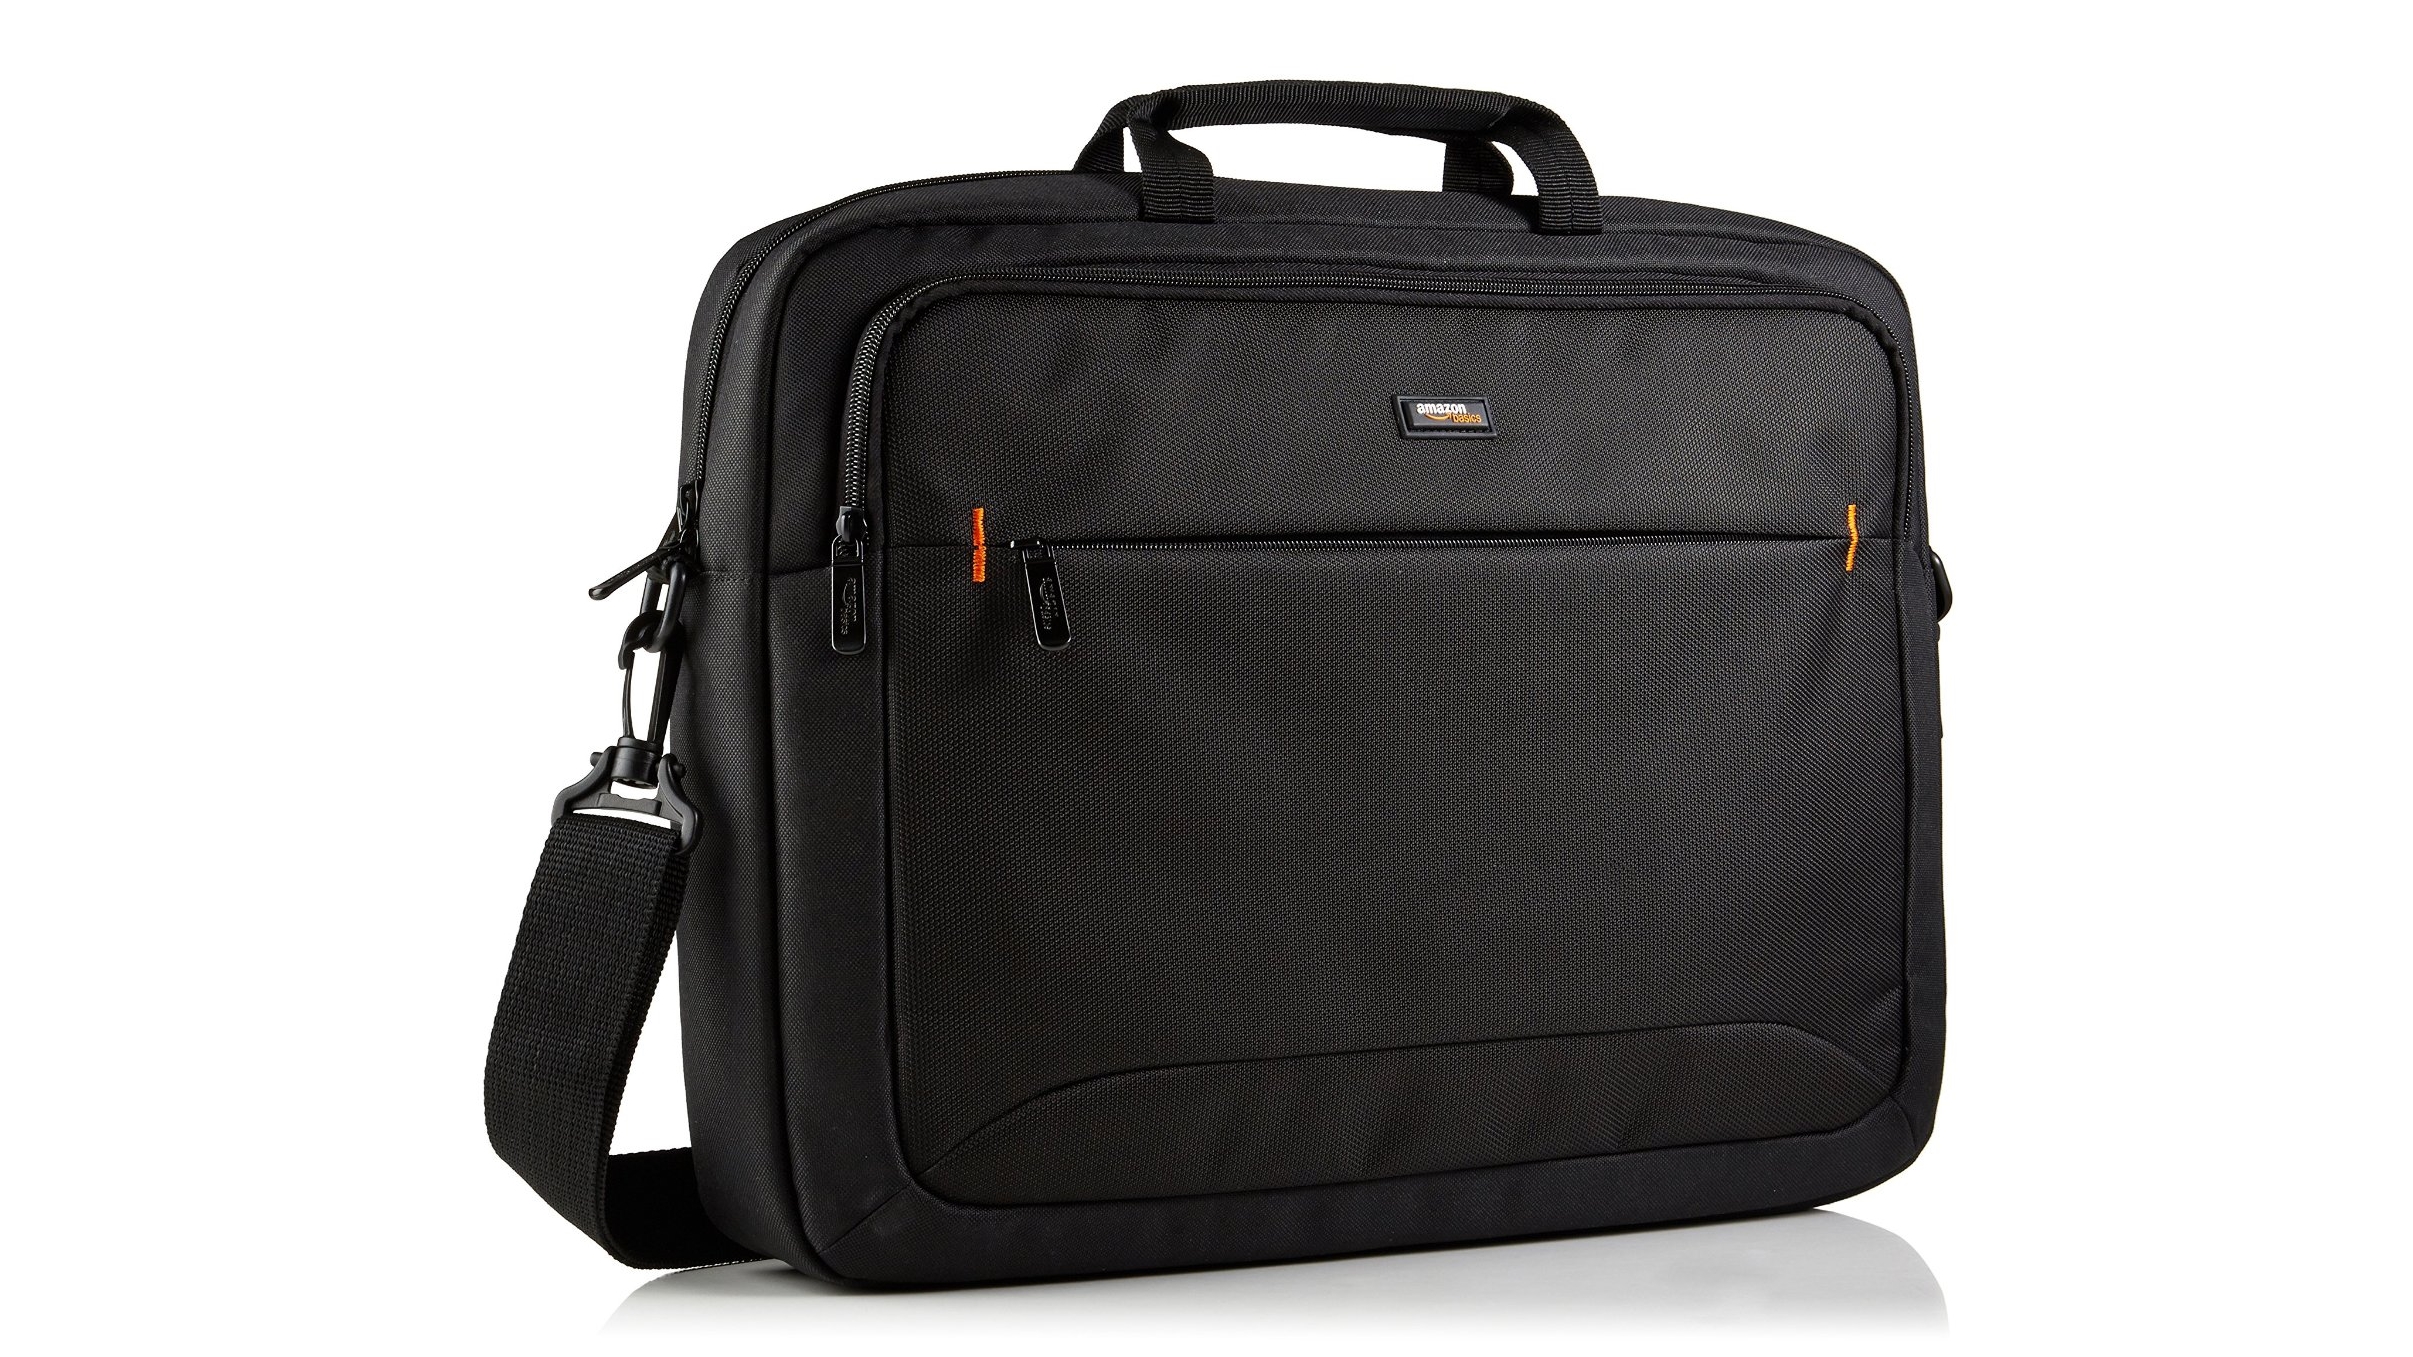 Best laptop bag 2019: top bags and backpacks to carry your kit 6